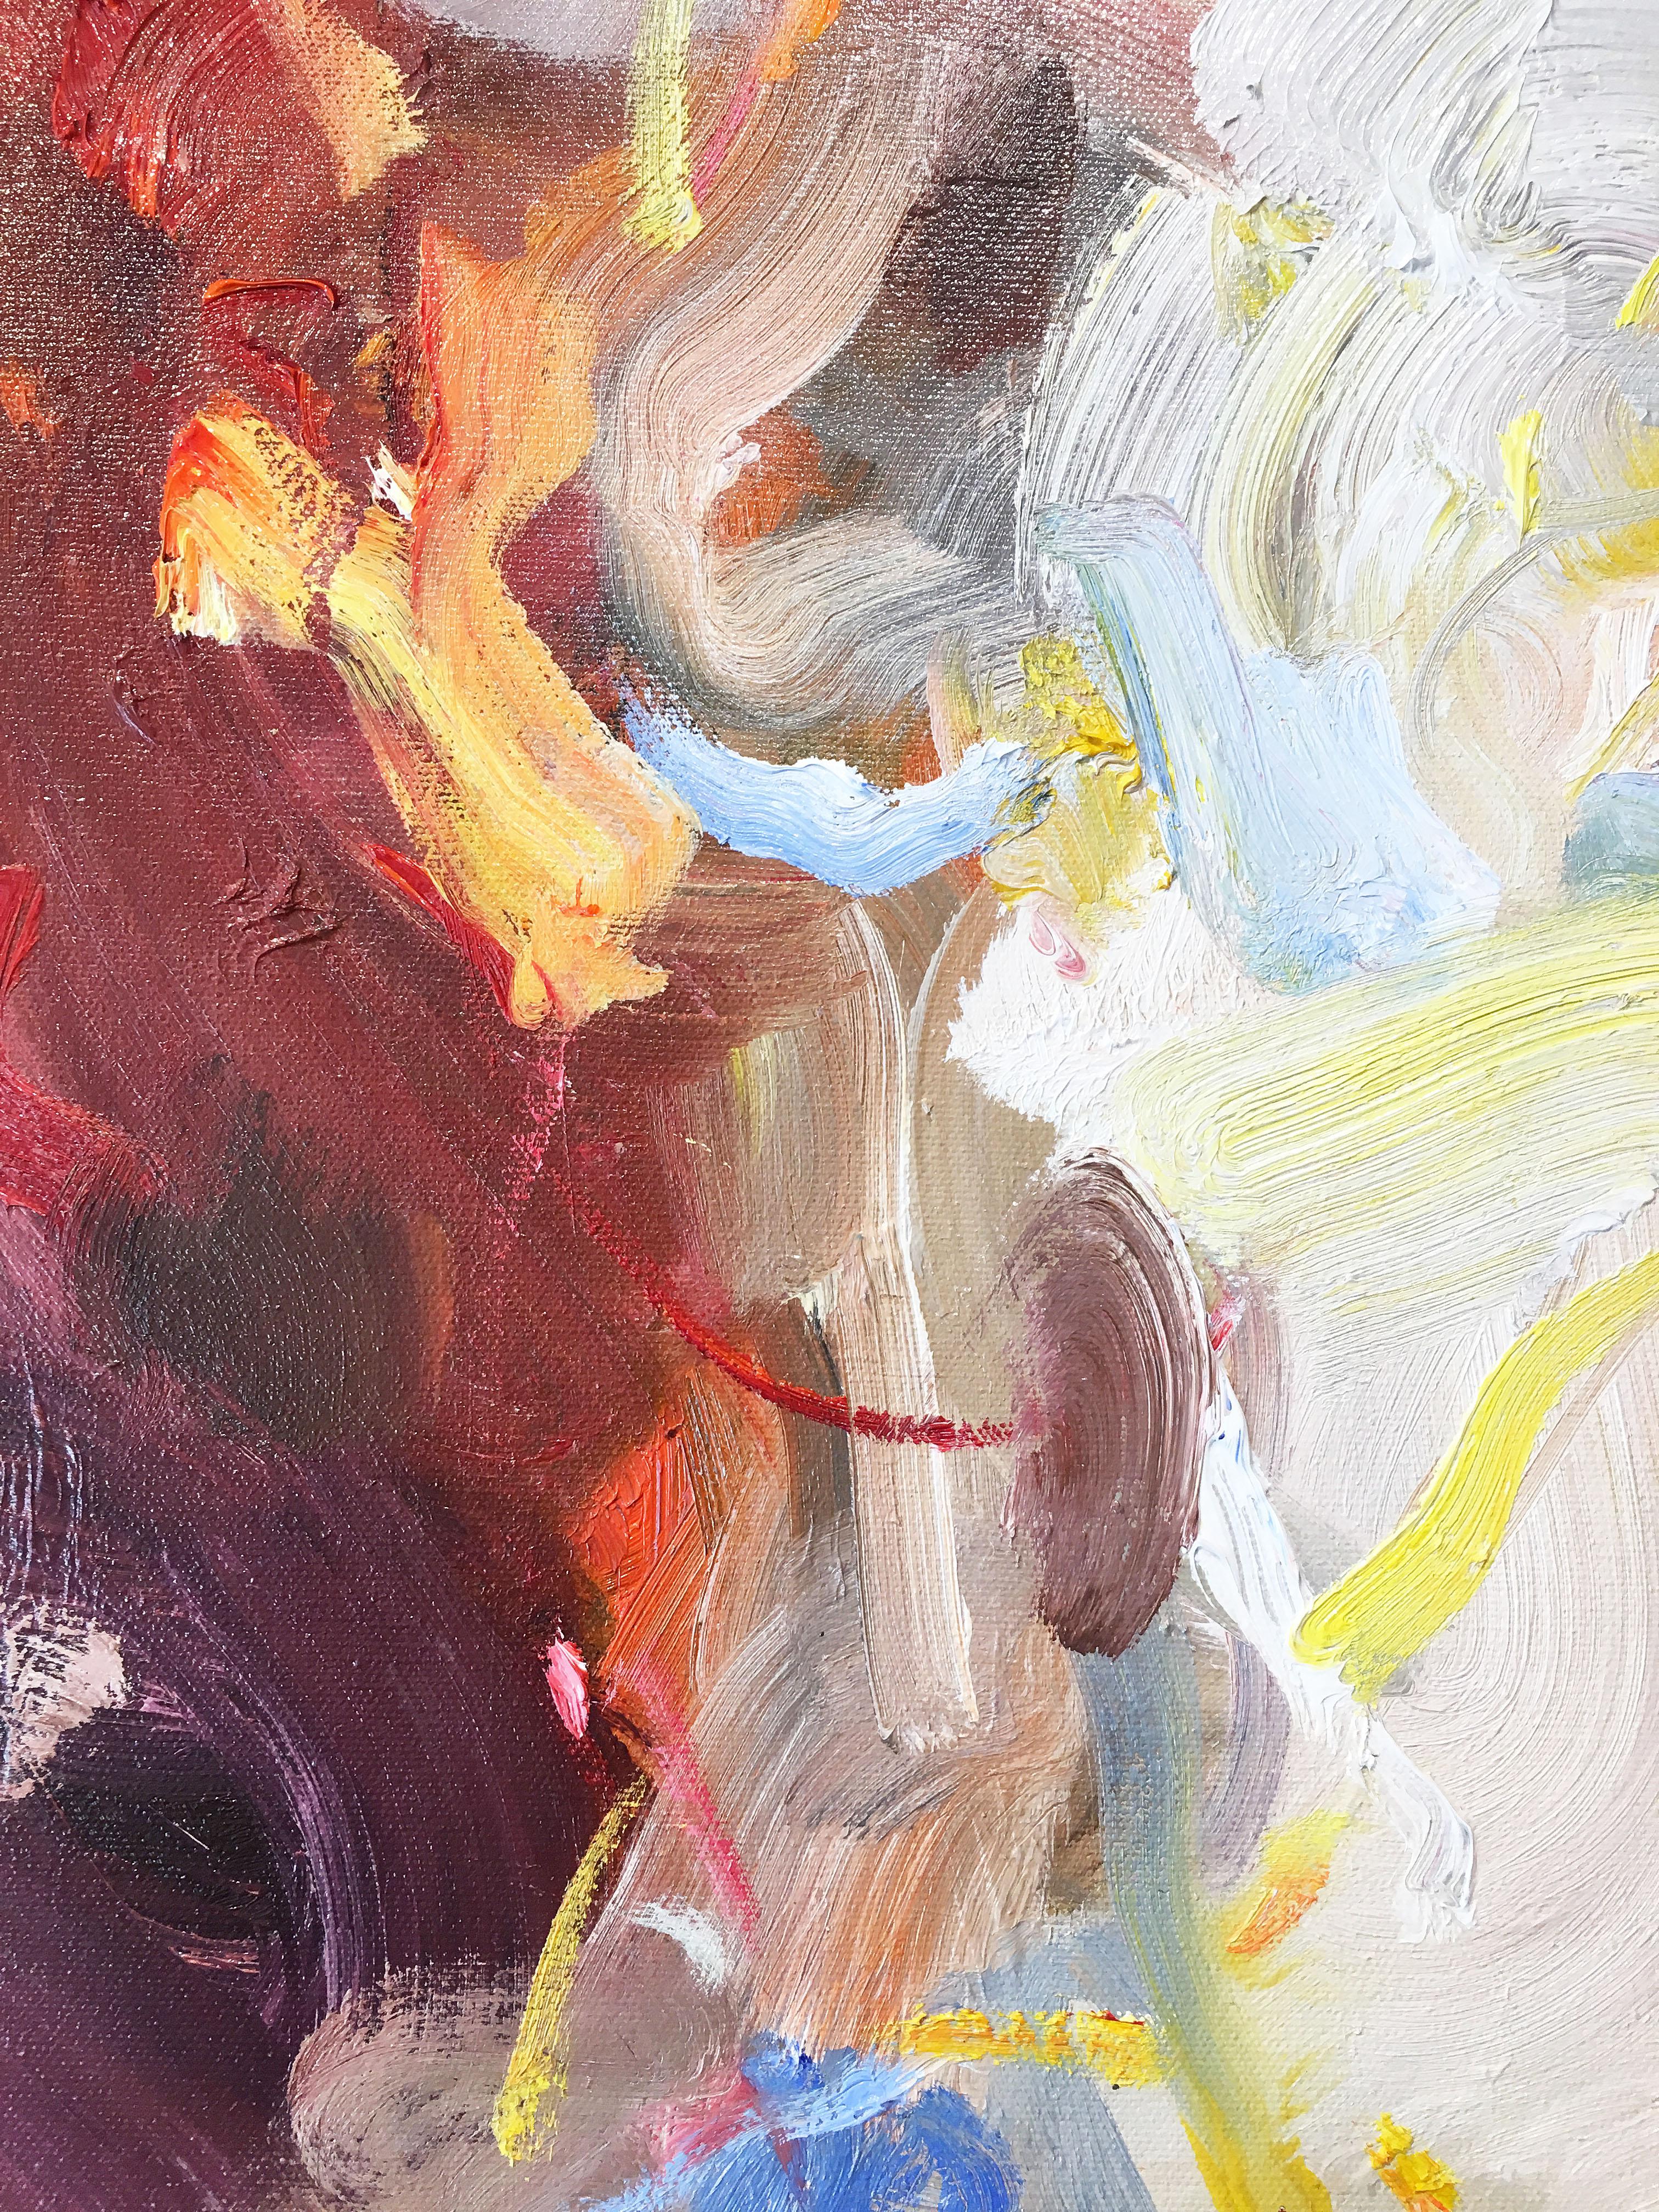 This Fall - Abstract Expressionist Painting by Yangyang Pan